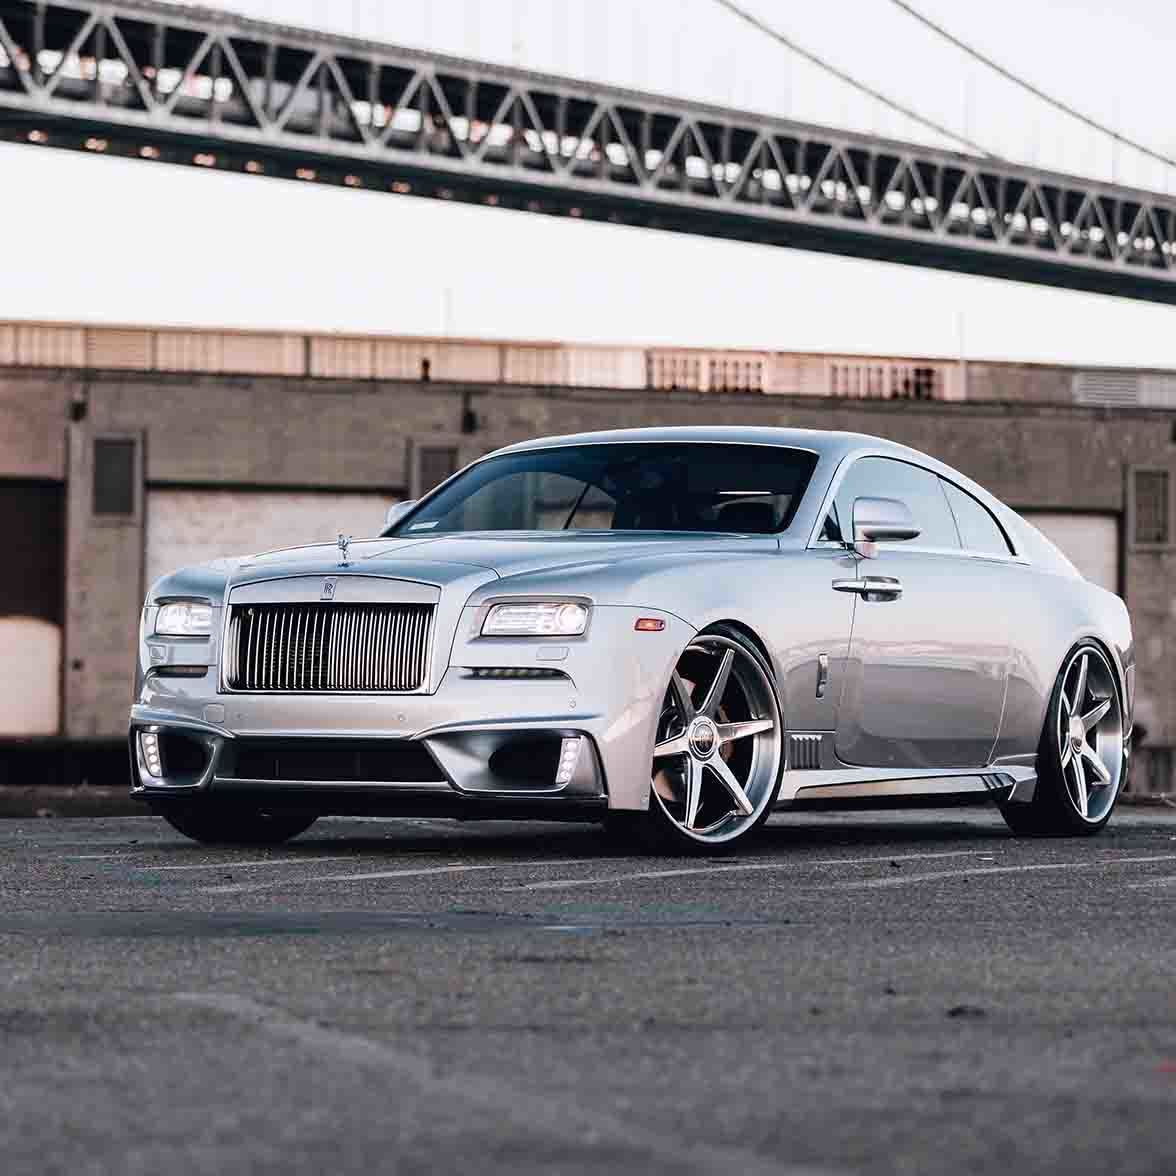 images-products-1-2874-232975162-silver-rolls-royce-wraith-brixton-forged-s60-targa-series-forged-wheels-brushed-gloss-010.jpg